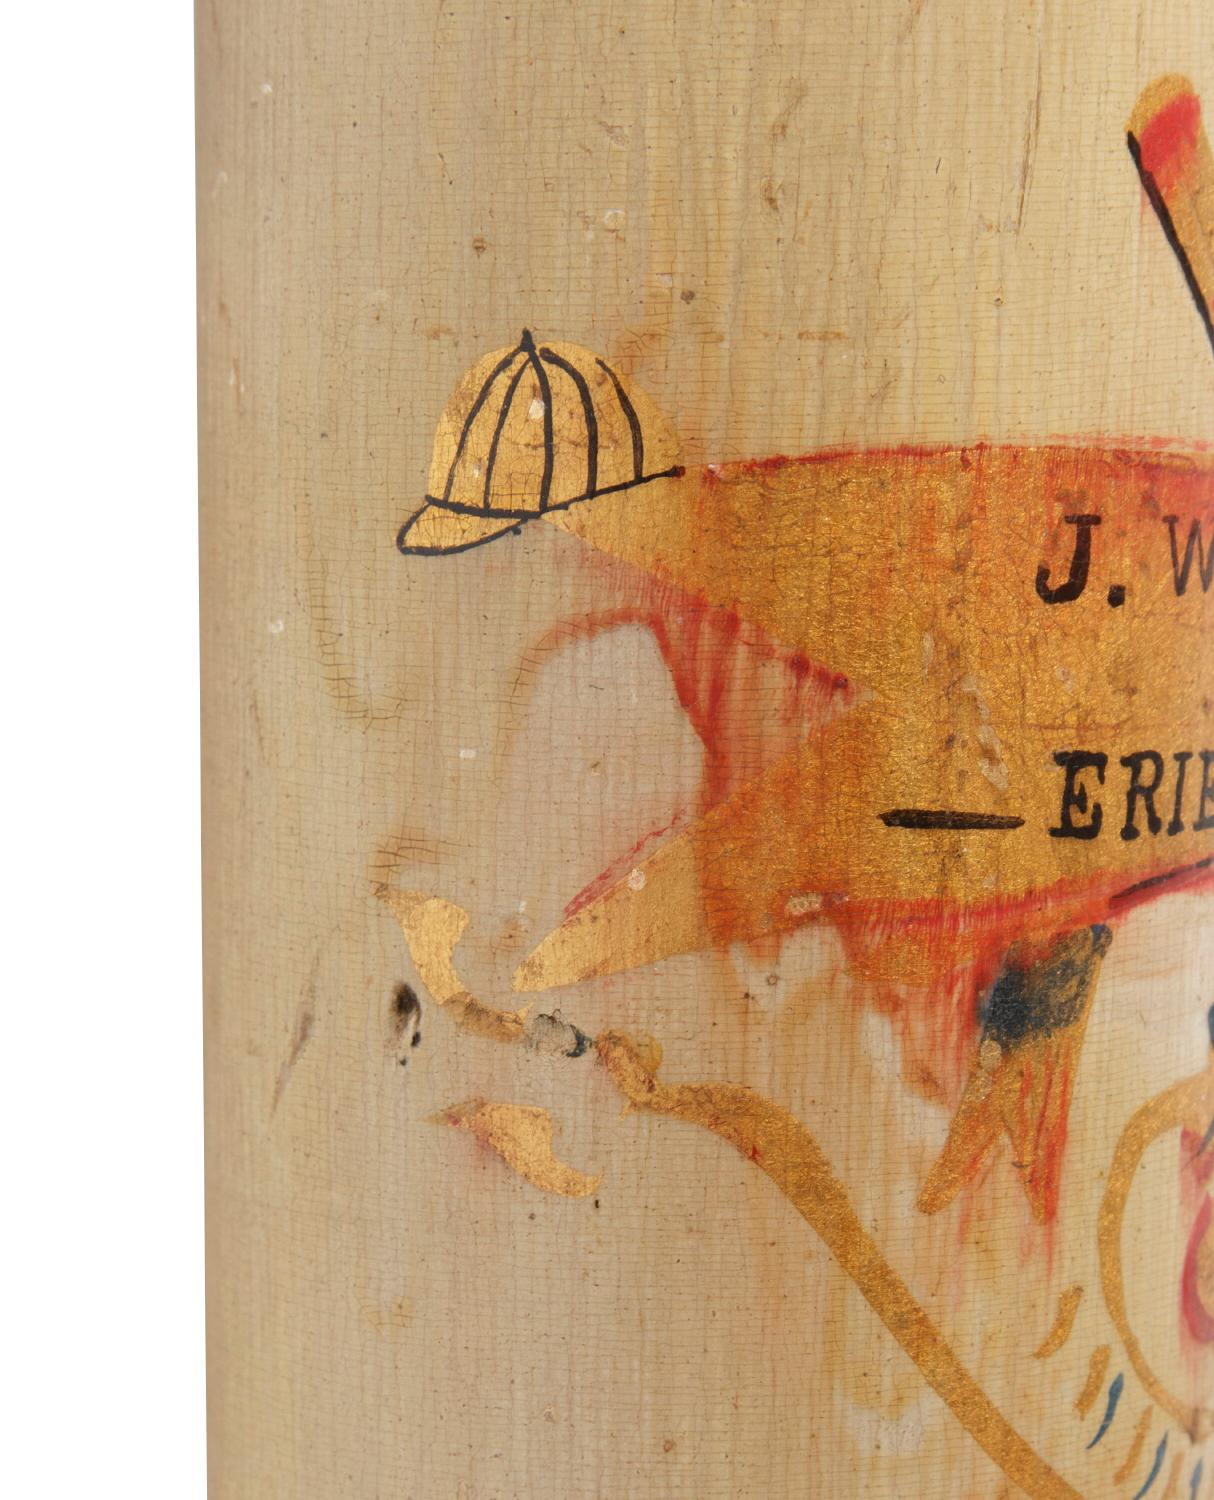 19th Century Oversized, Paint-Decorated Baseball Bat Presented to J. Whipple For Sale